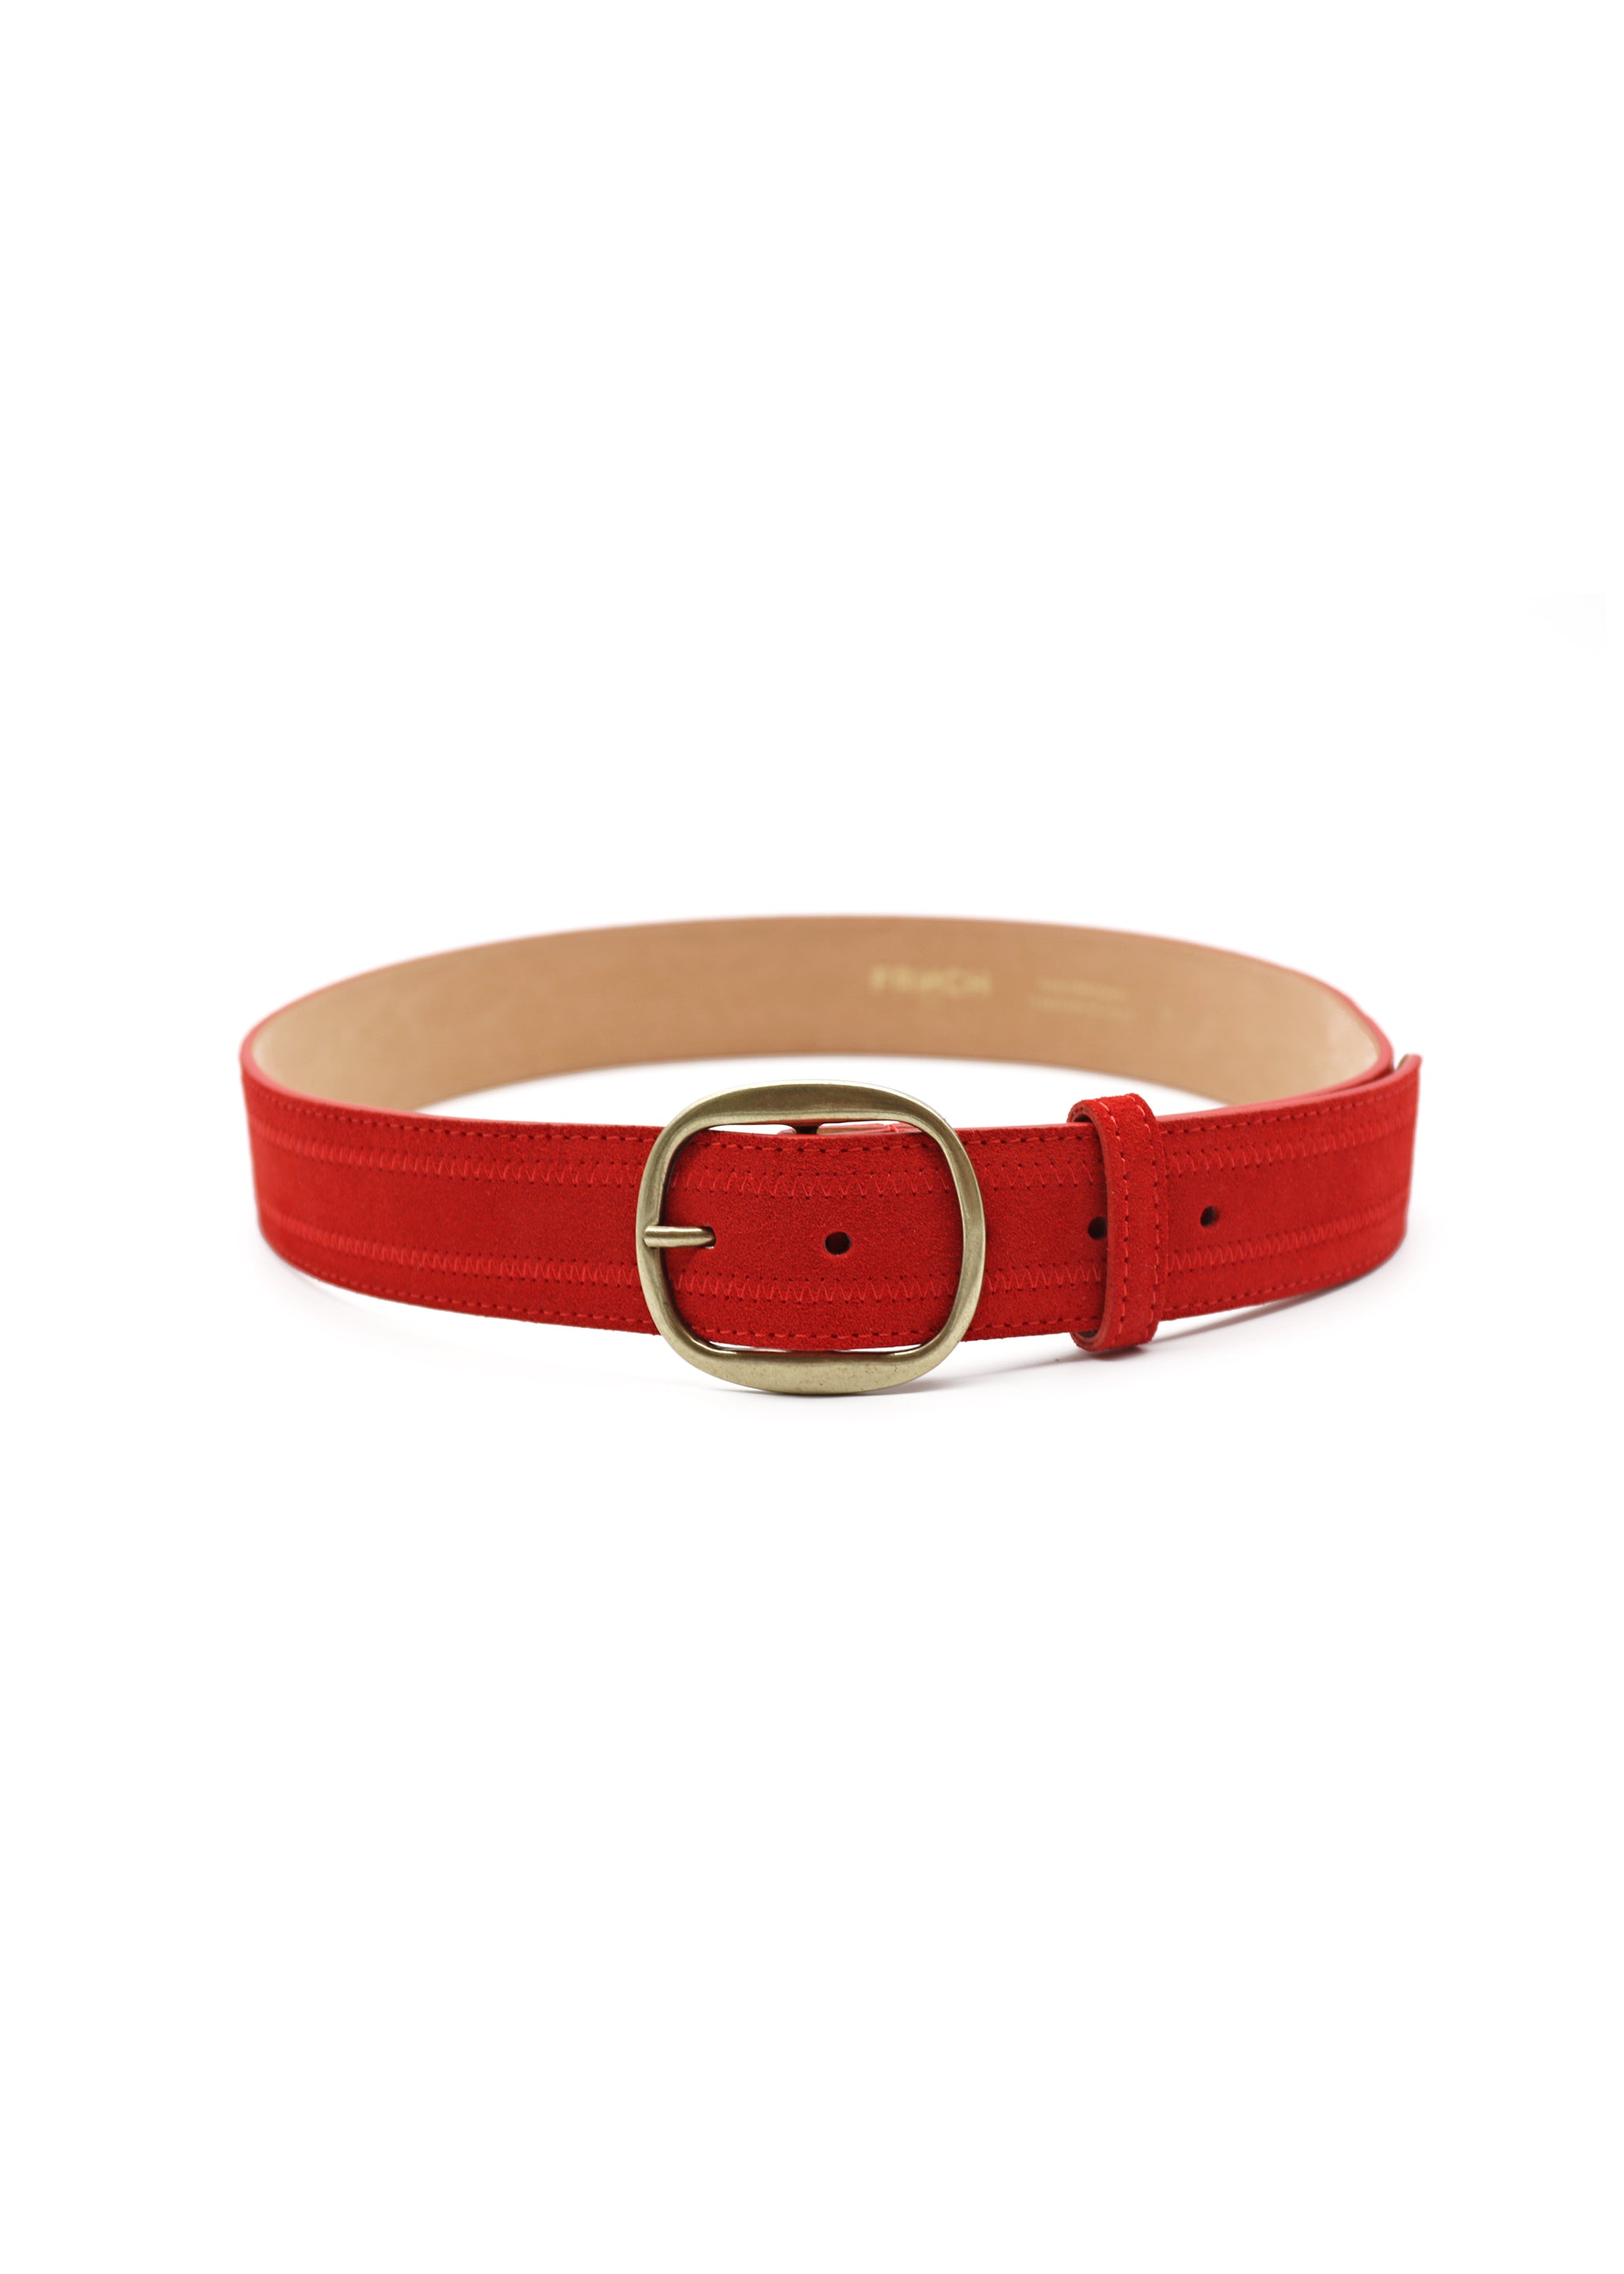 CEMILE Belt Red